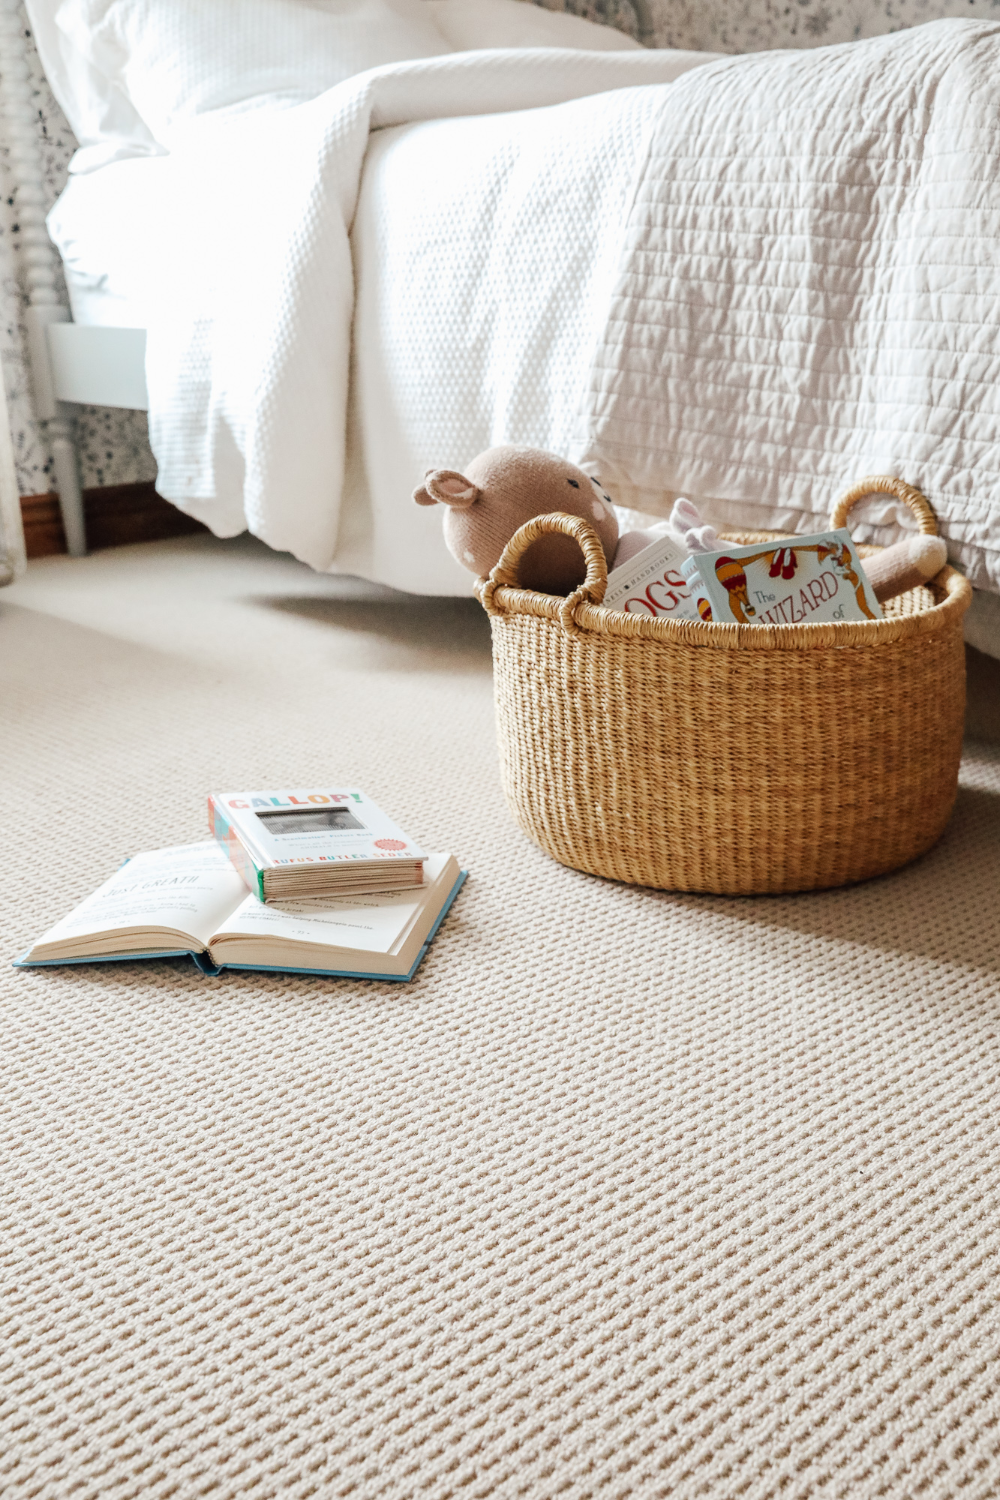 The Timeless Elegance of Wool Carpets: A
Complete Guide